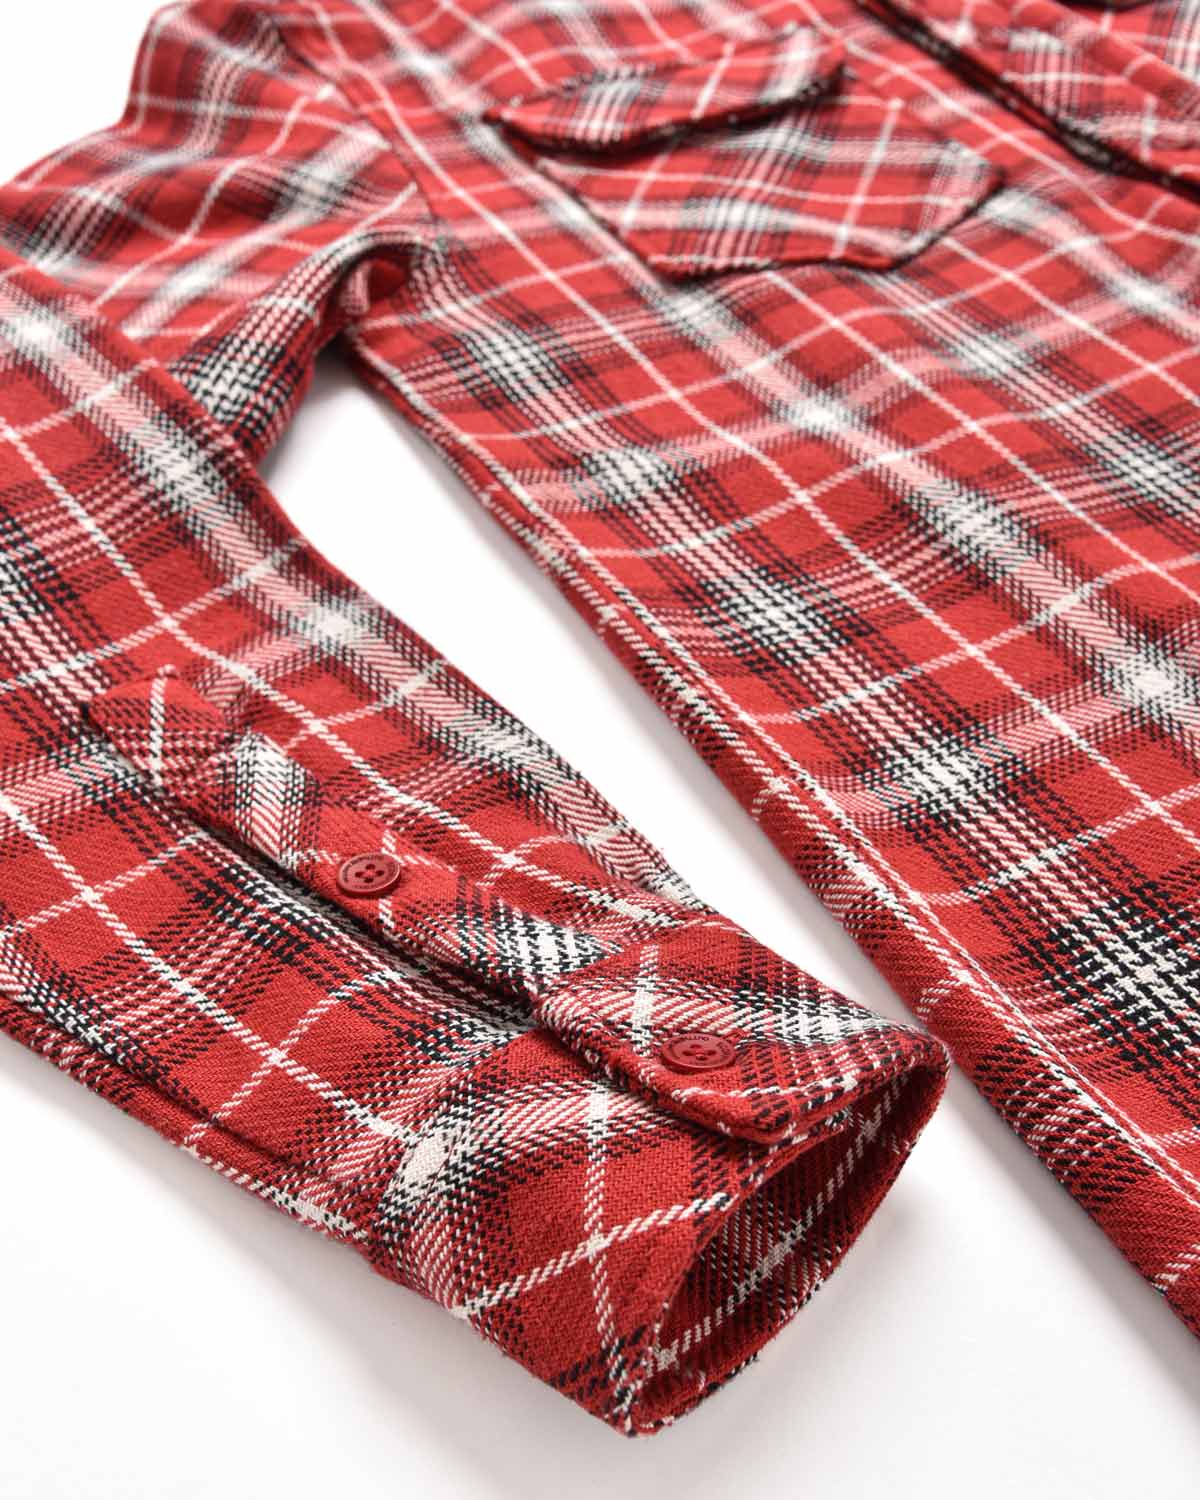 Man | Red/Black Checked Flannel Overshirt